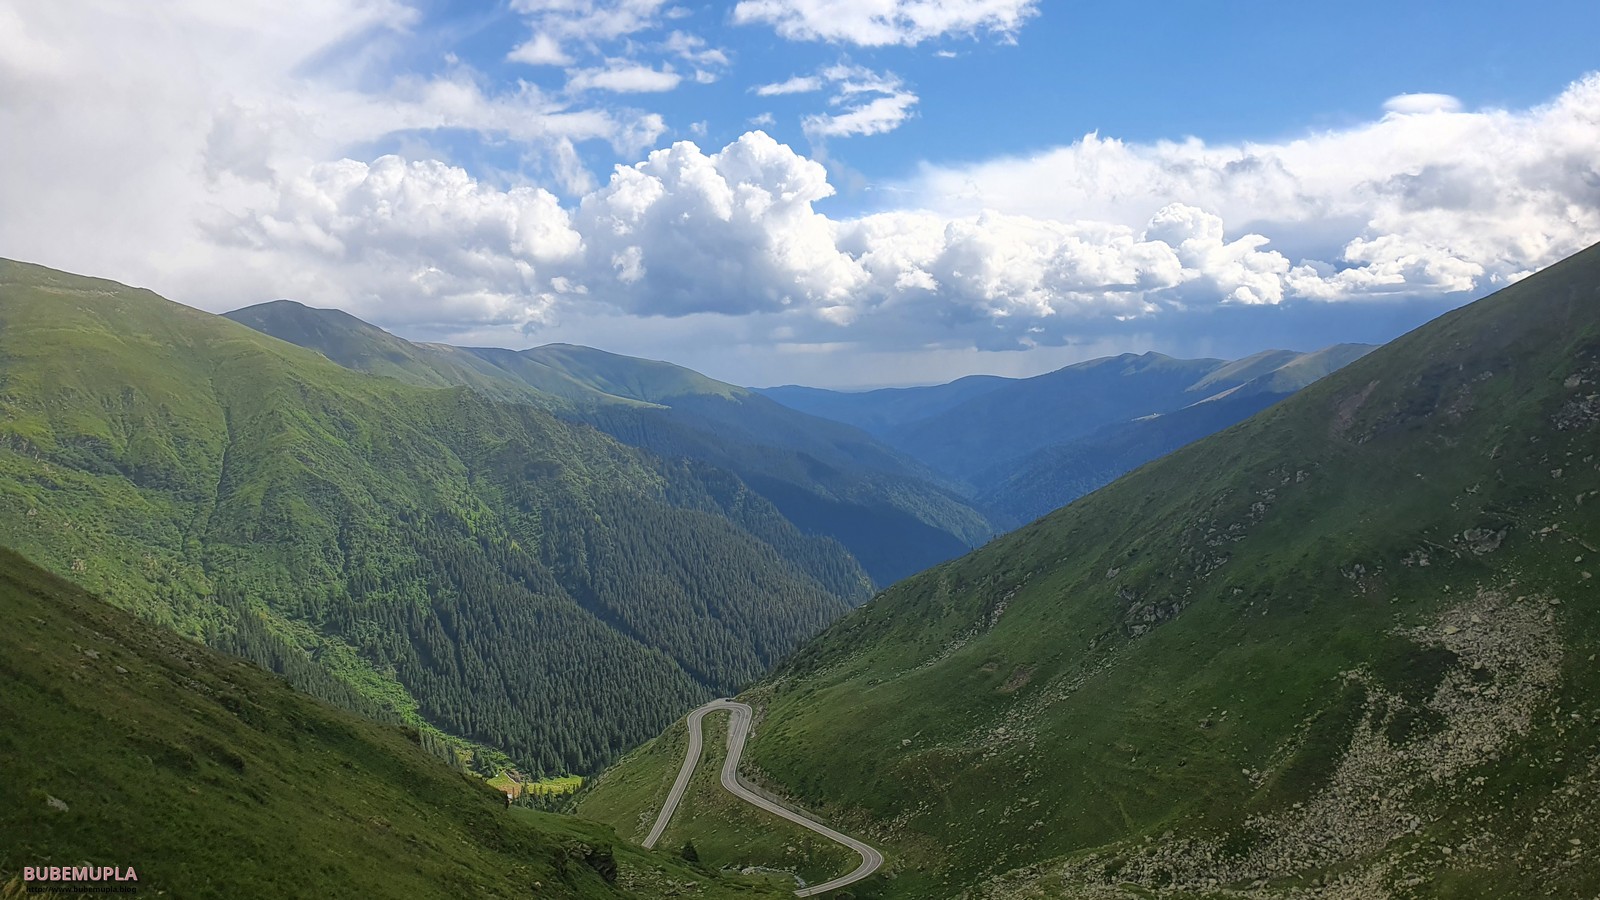 Chapter 23 in which we cross the Carpathian mountains